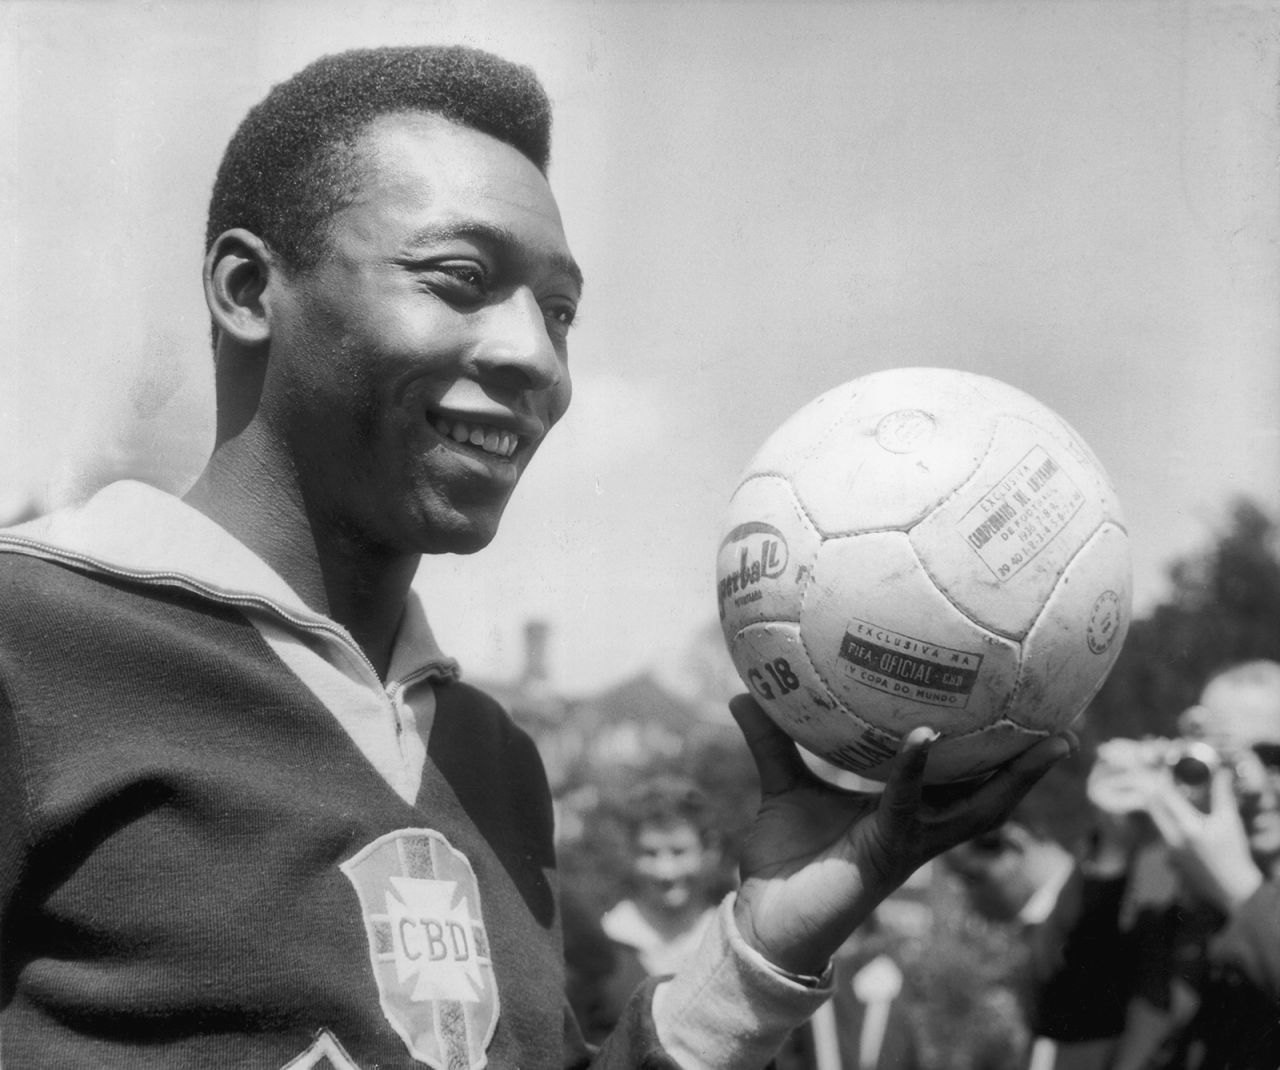 Pele, the famous Brazilian soccer player, was left-handed. 